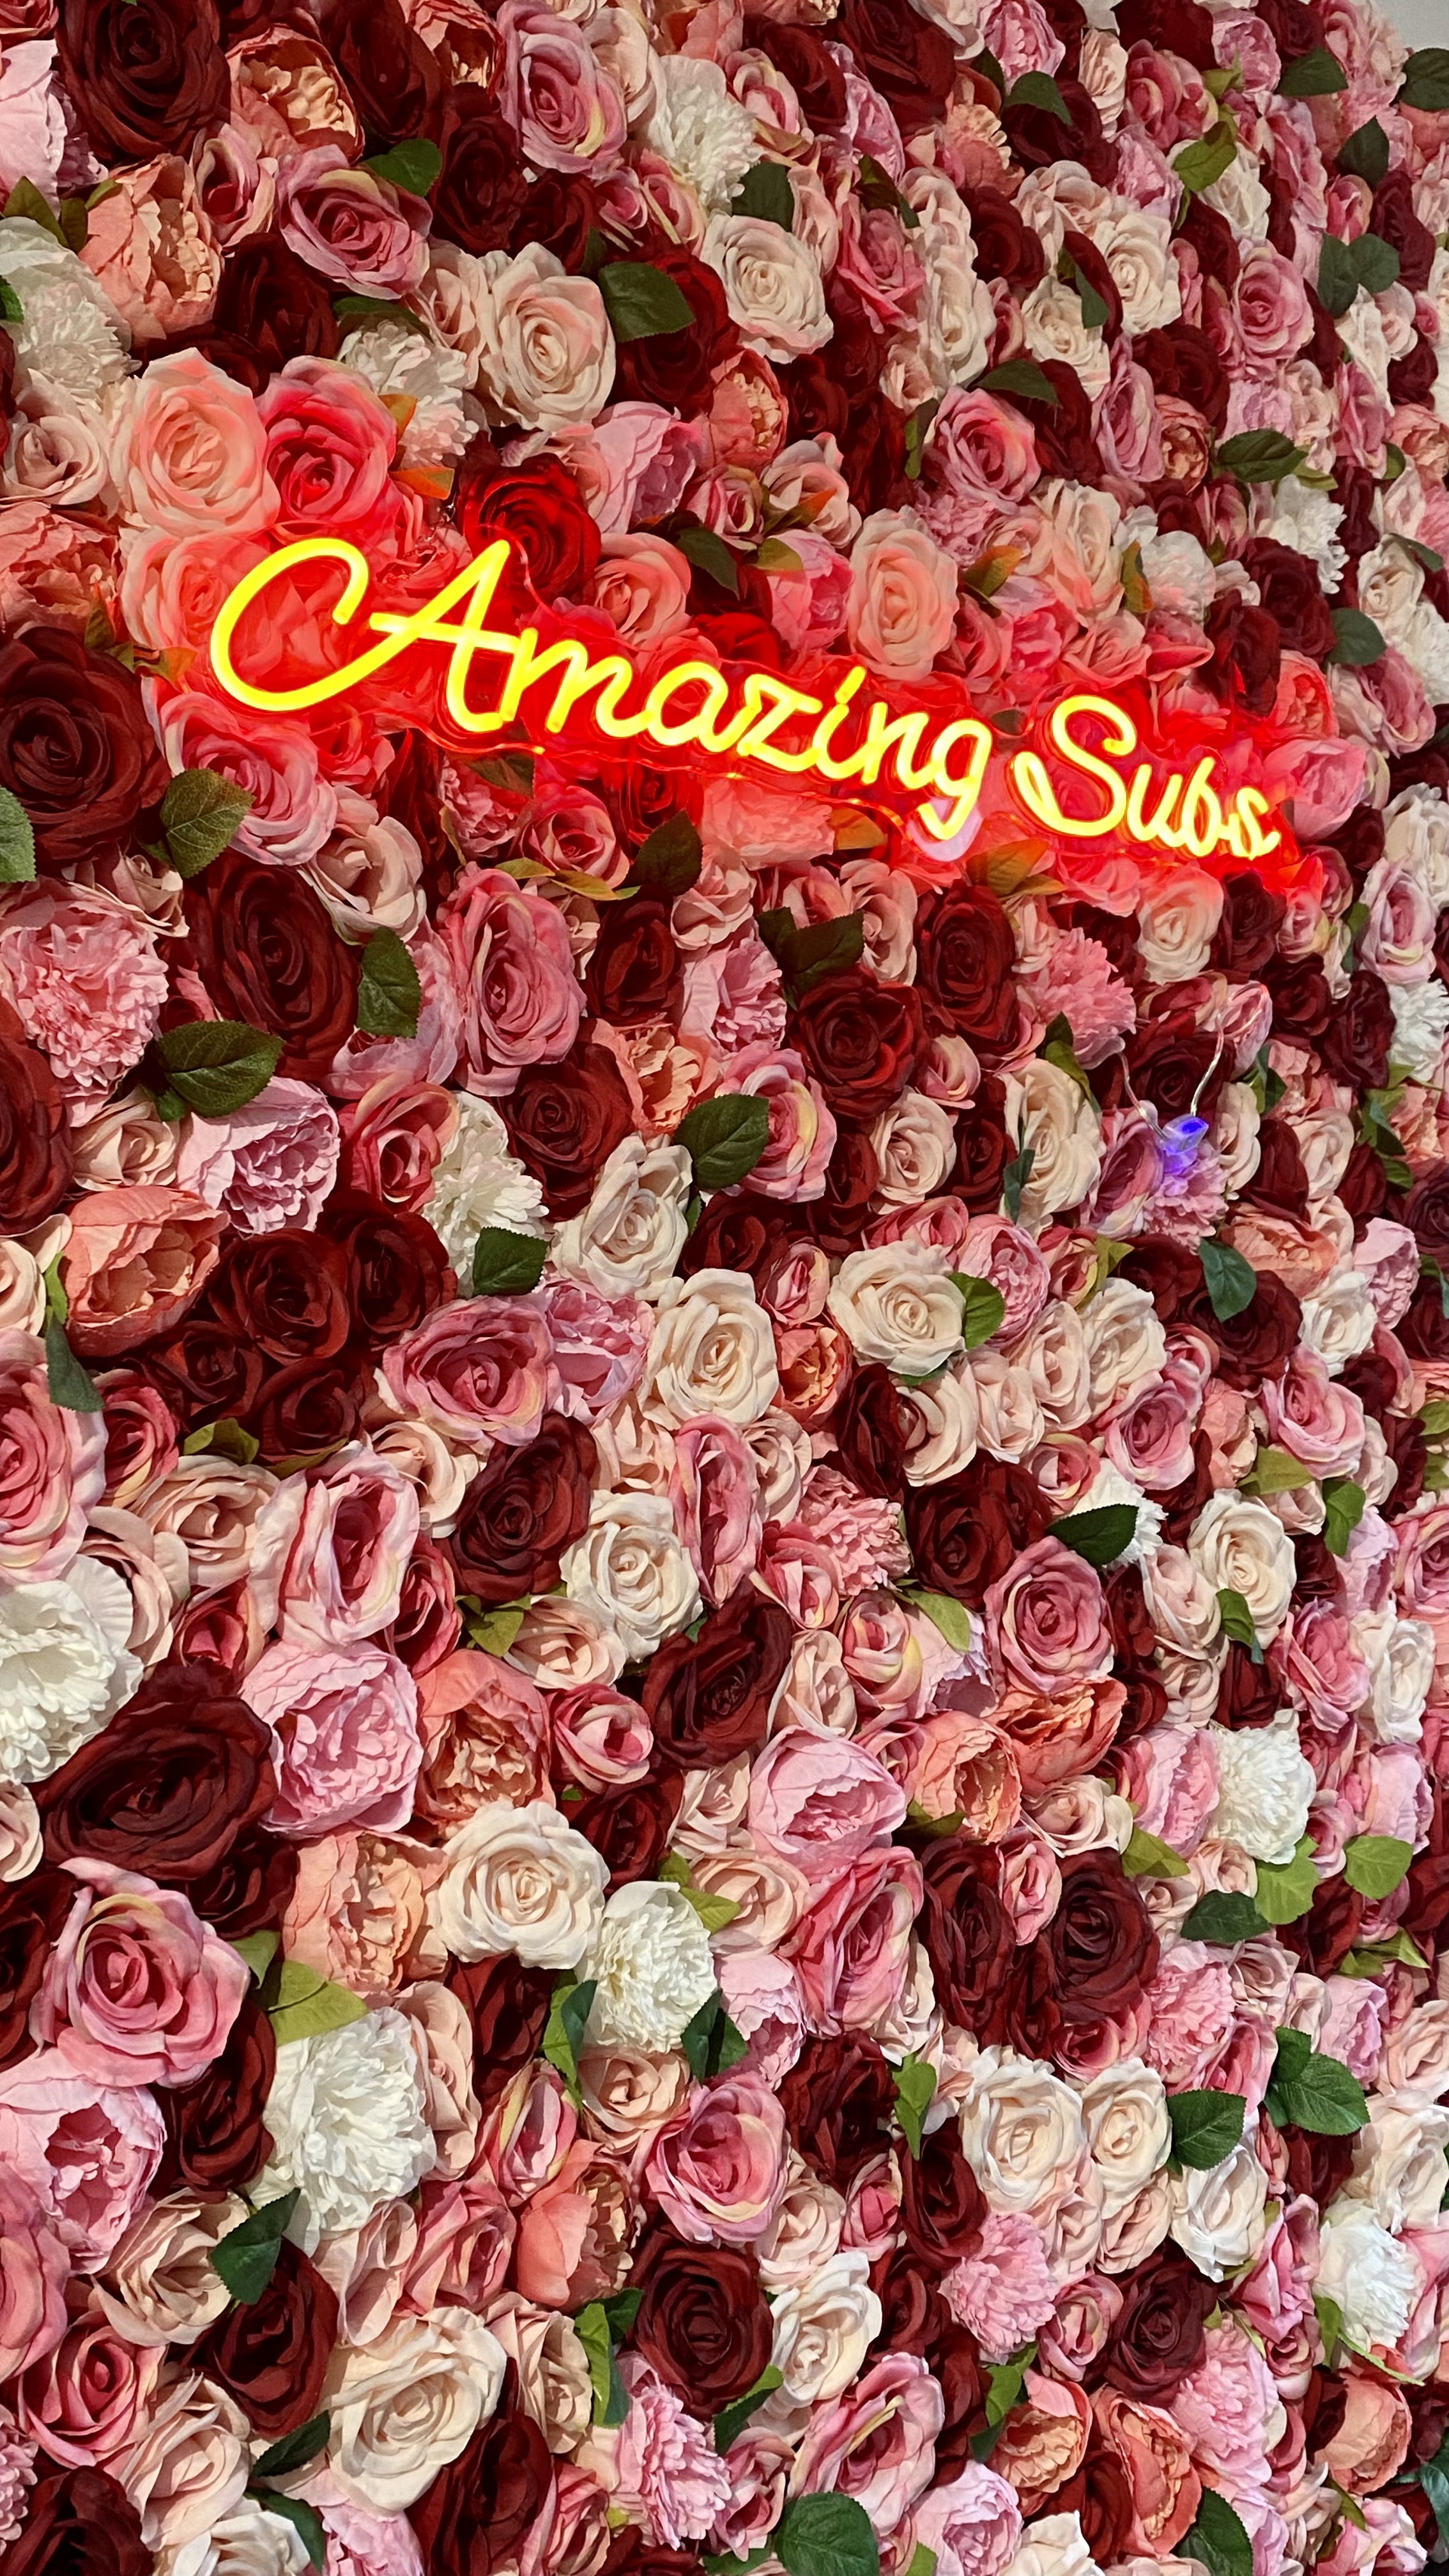 Beautiful floral background, perfect for taking pictures with friends and family to spread the word about Amazing Subs- Photo by Zynab Al-Timimi